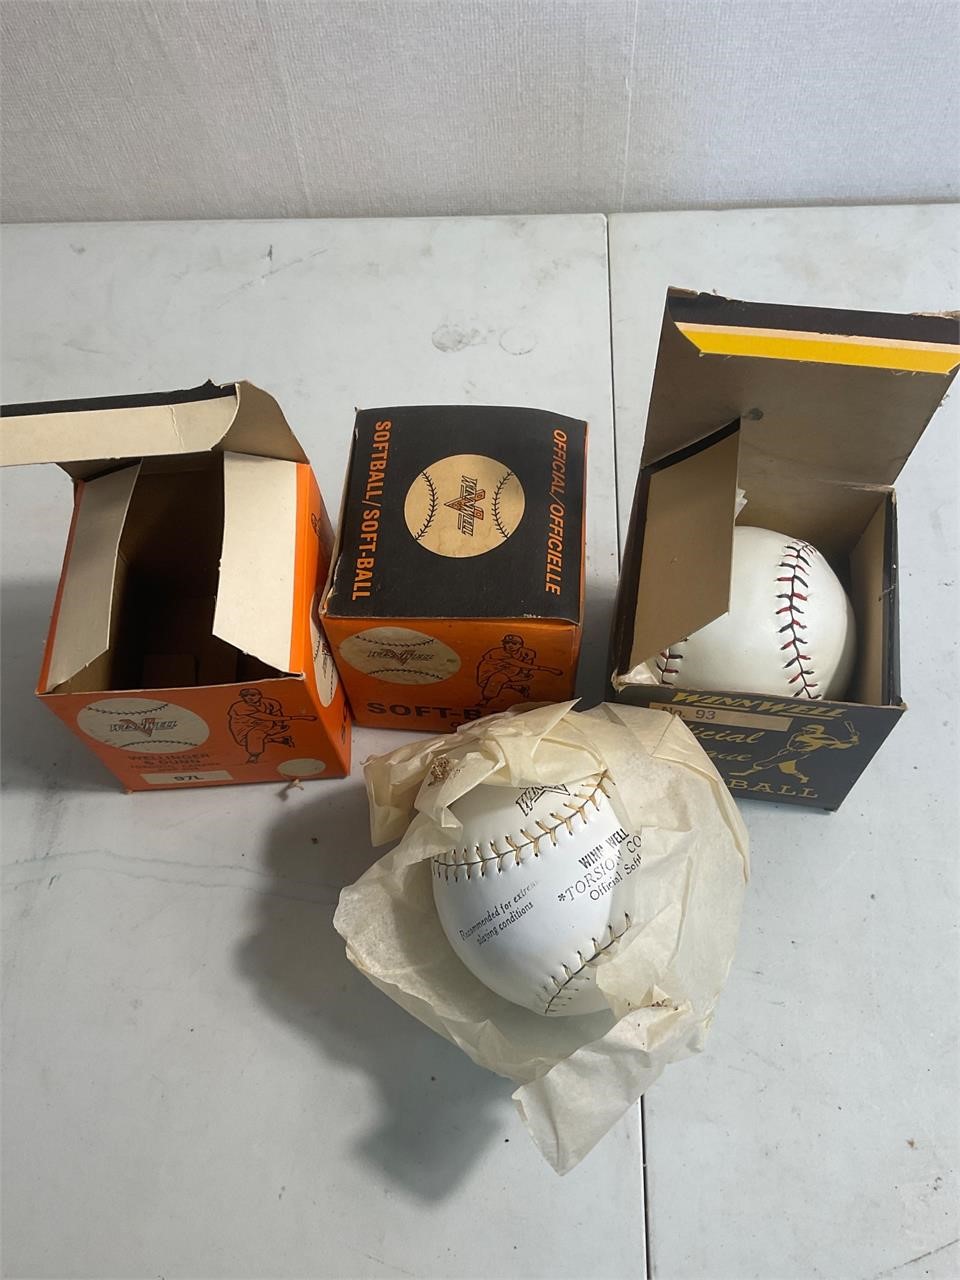 Nate’s estate and collectable auction (mixed items)